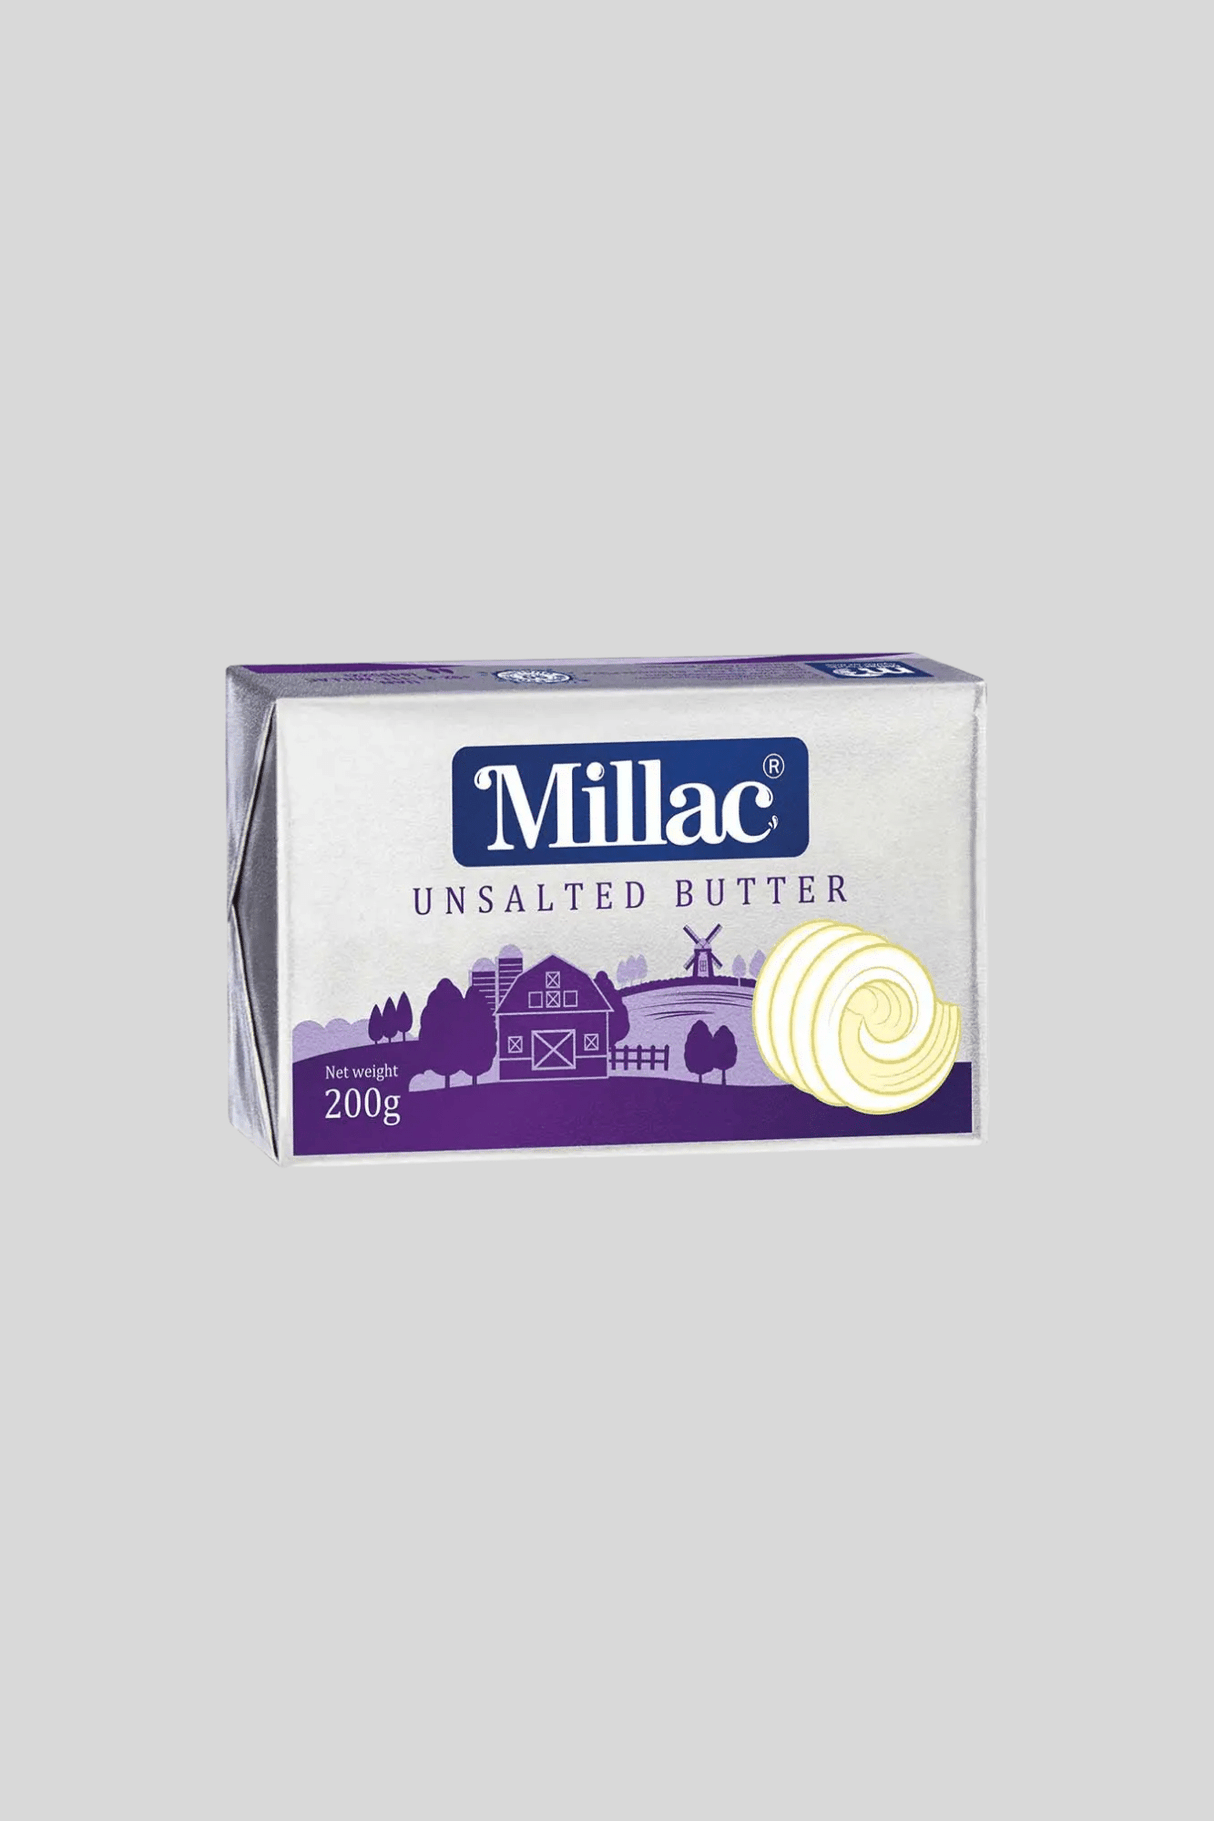 millac butter unsalted 200g